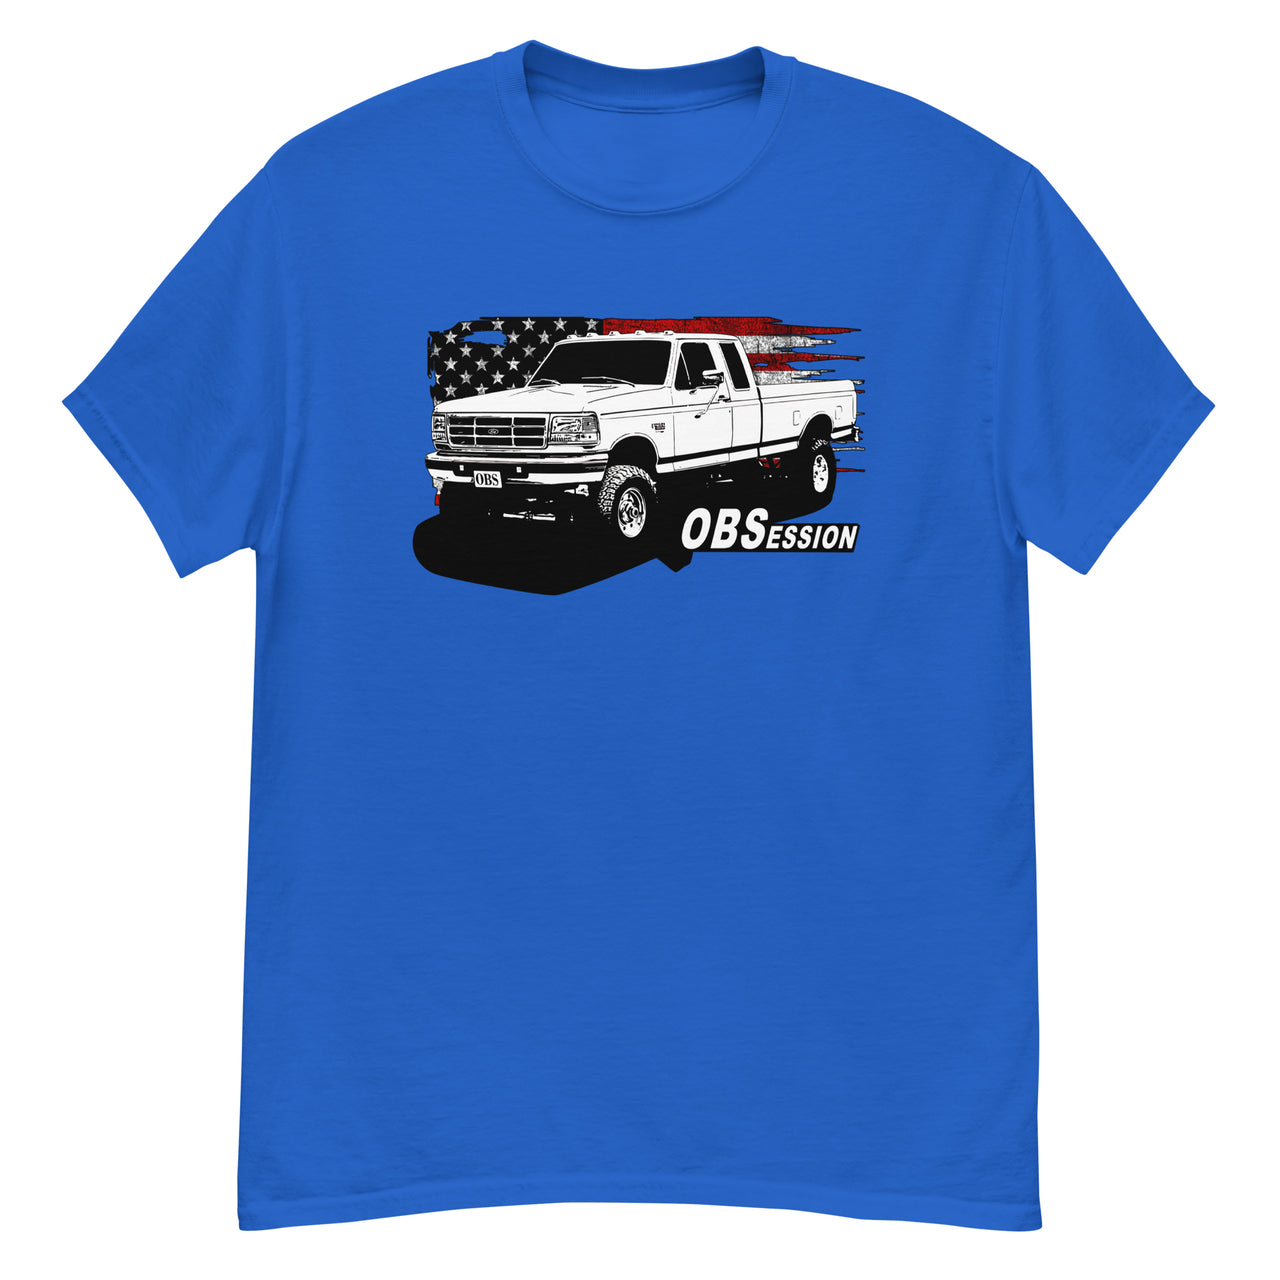 Patriotic OBS Ext Cab Truck T-shirt in Blue